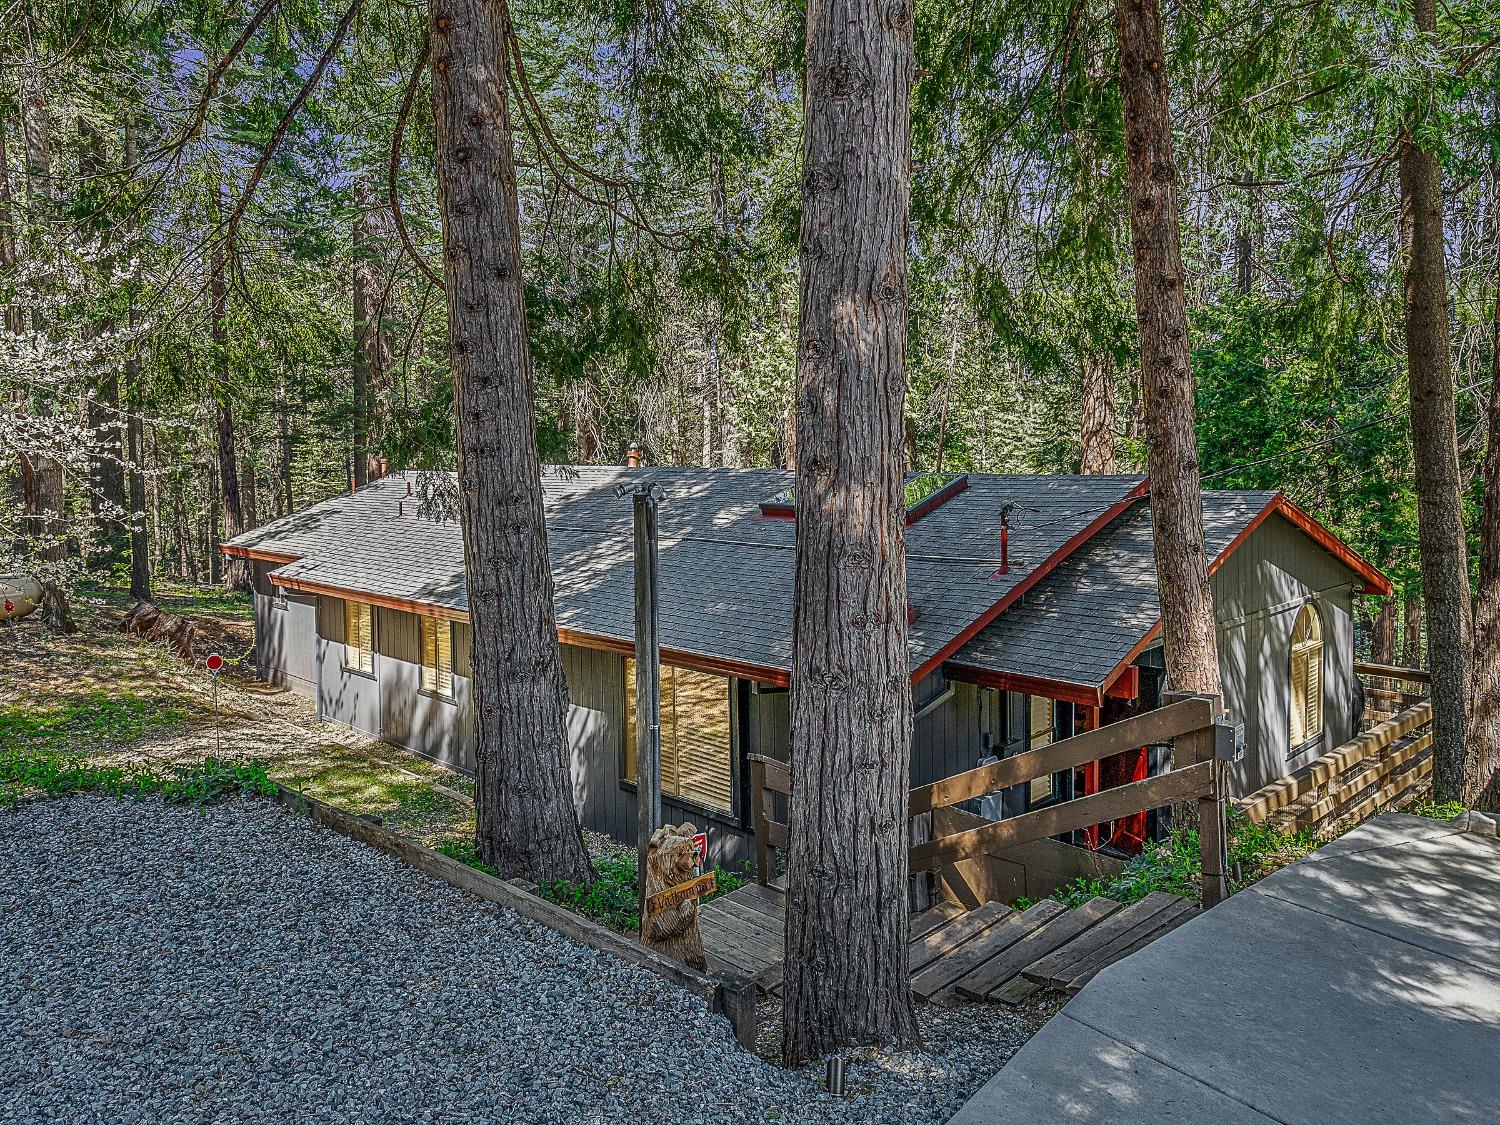 Well maintained and cherished home nestled in the Pines!